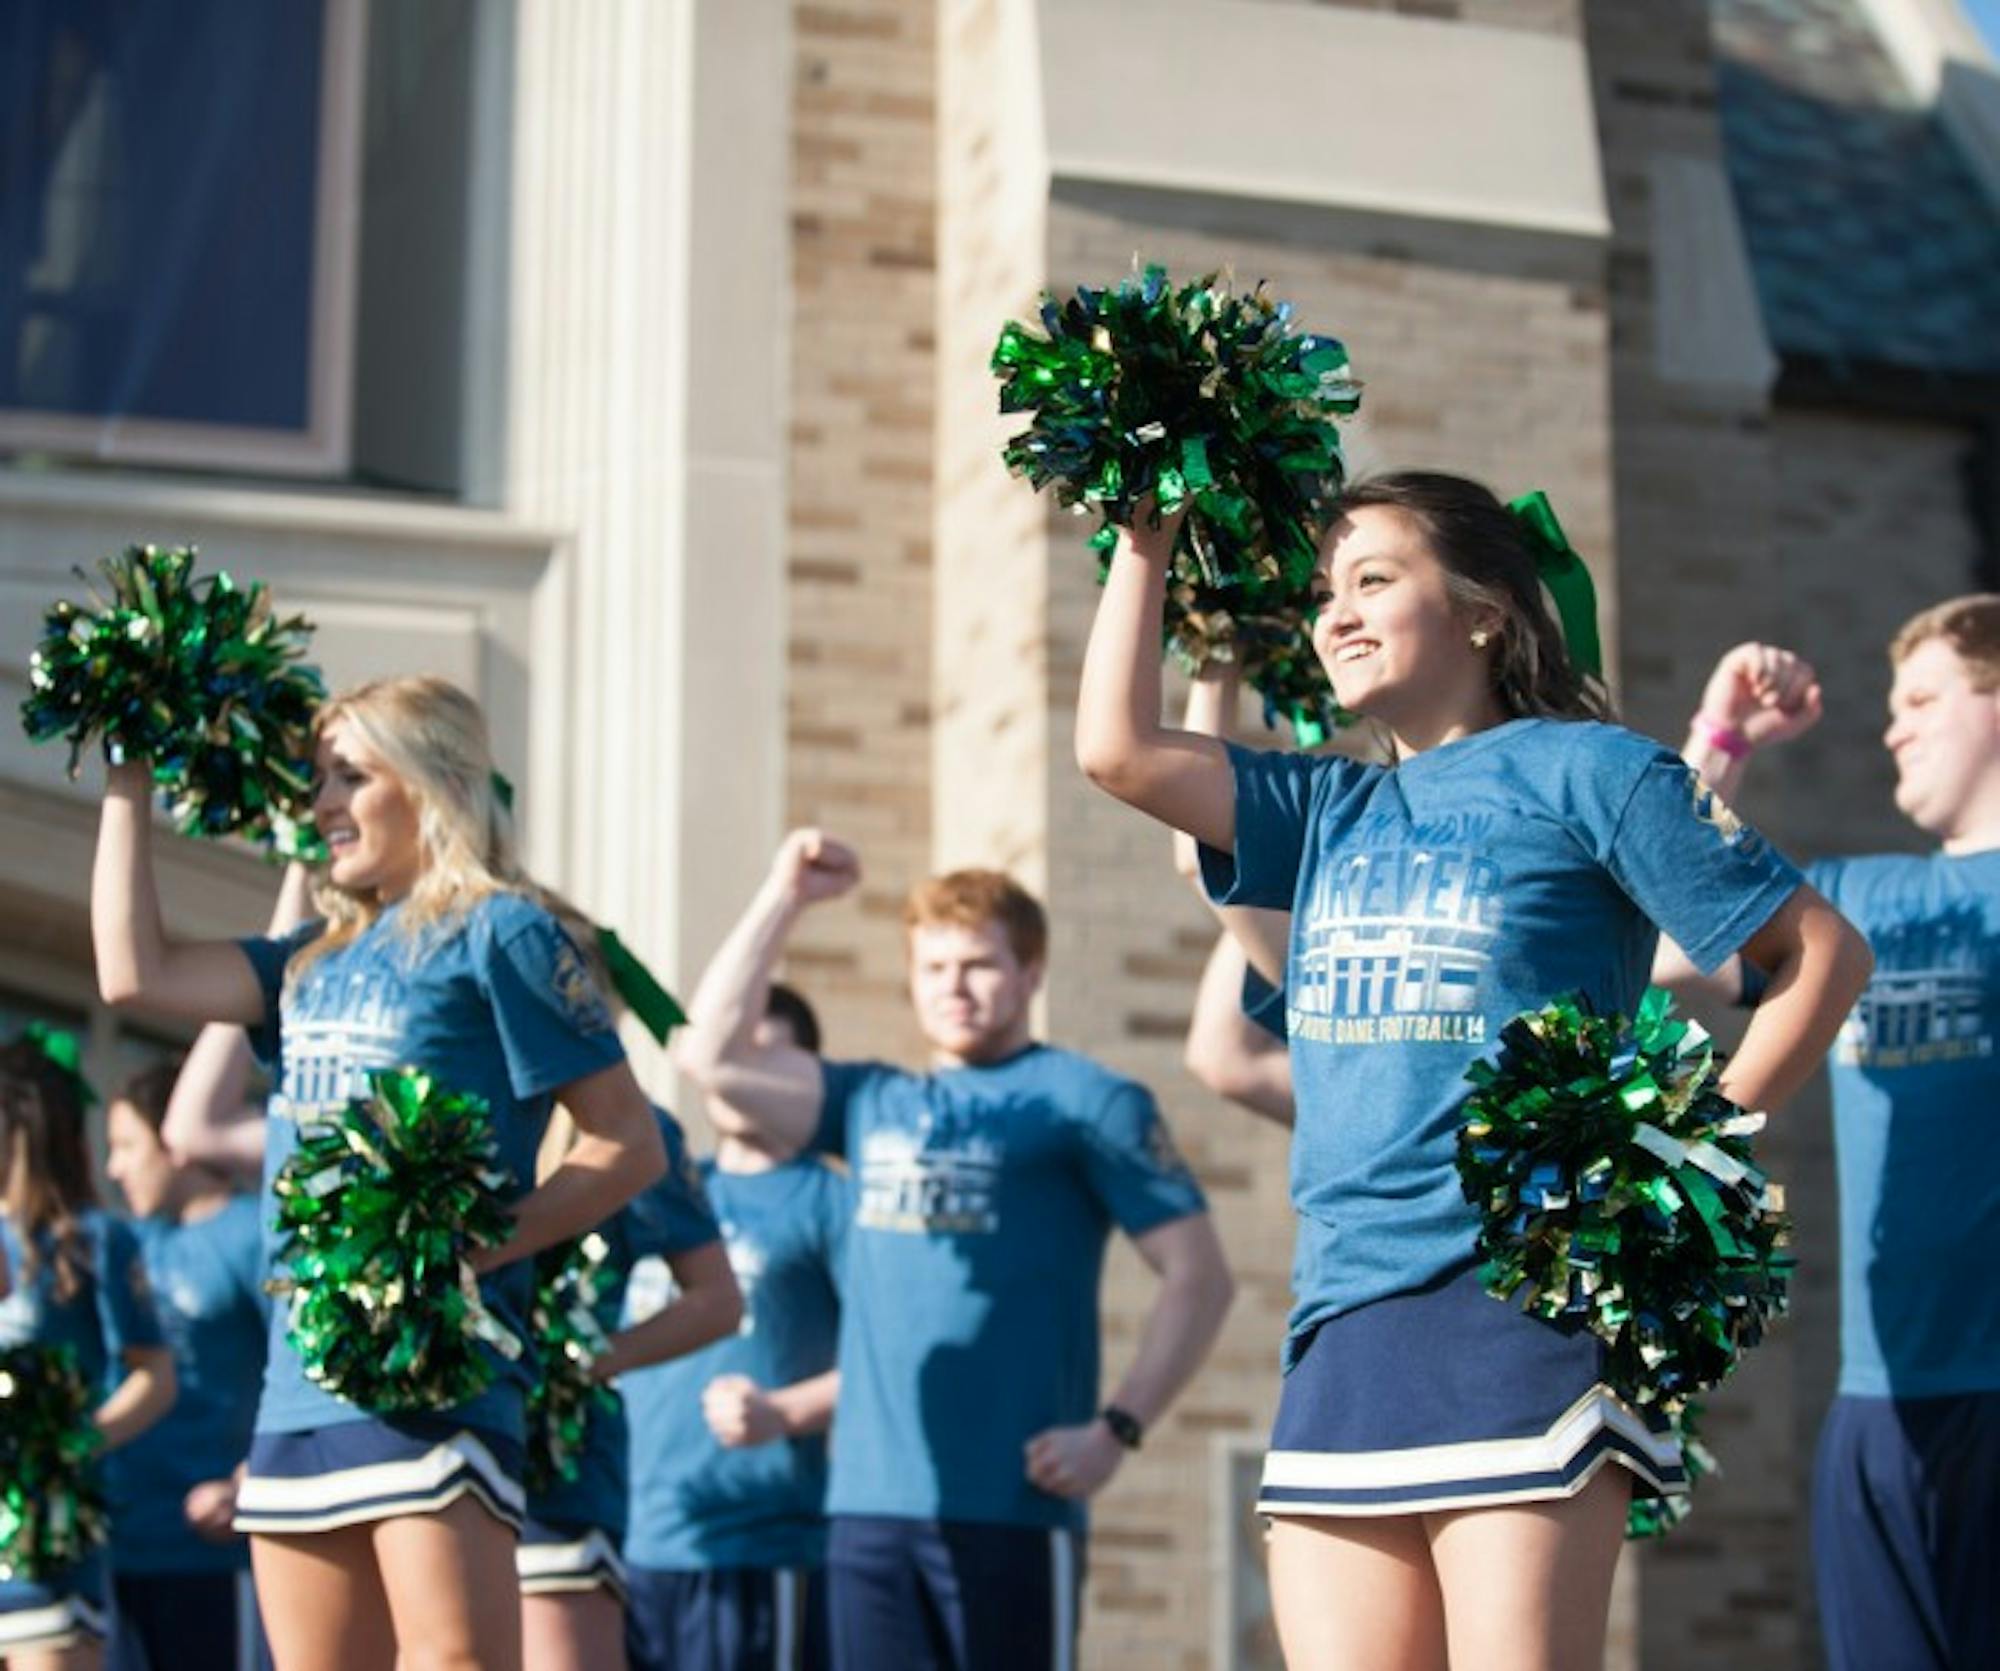 Notre Dame cheerleaders lead the crowd in chants for last year's unveiling ceremony for the 25th anniversary of The Shirt.